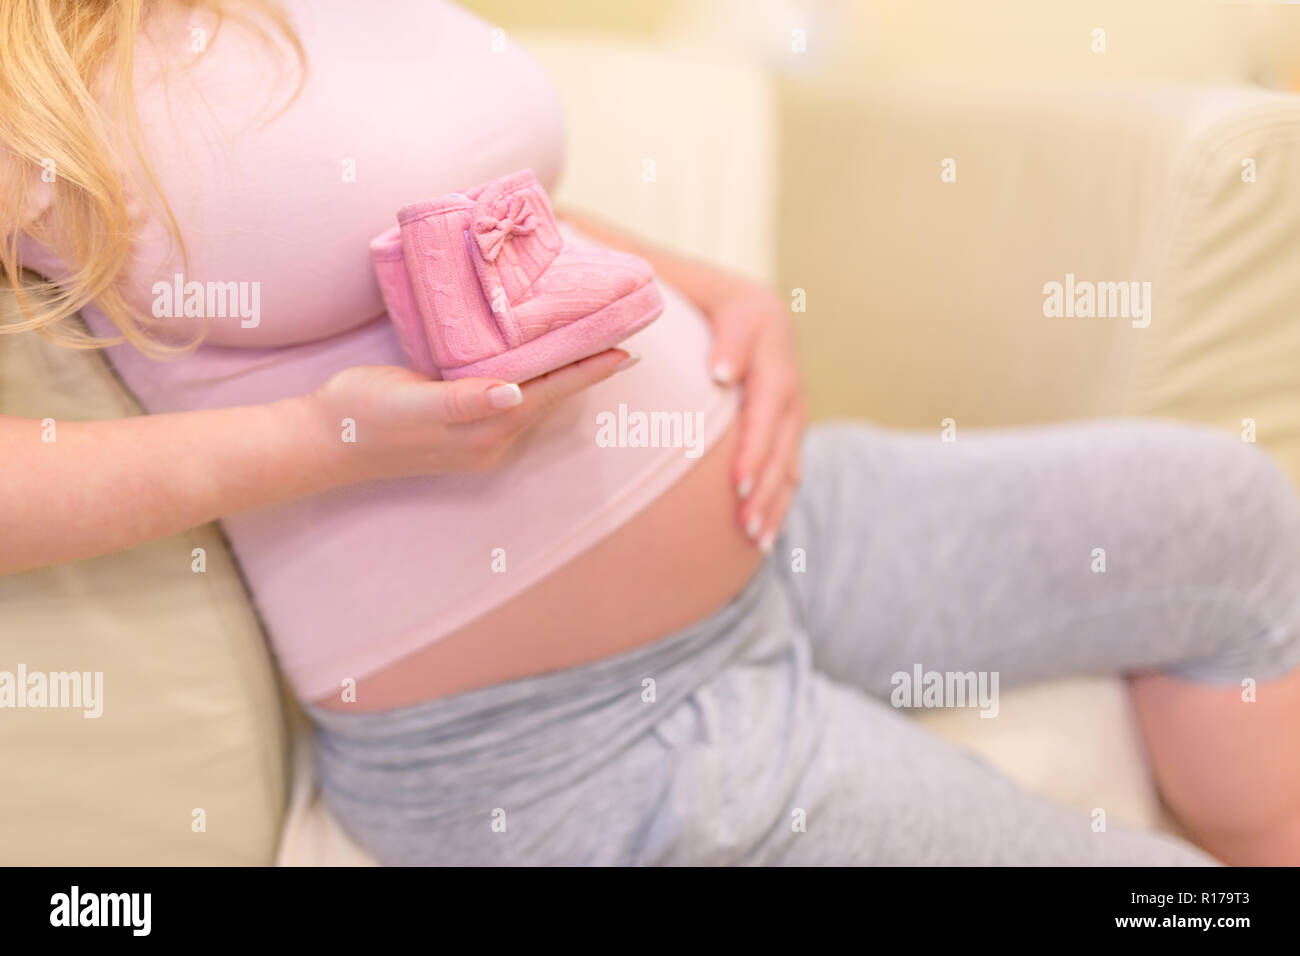 Small shoes for the unborn baby in the belly of pregnant woman. Pregnancy concept Stock Photo